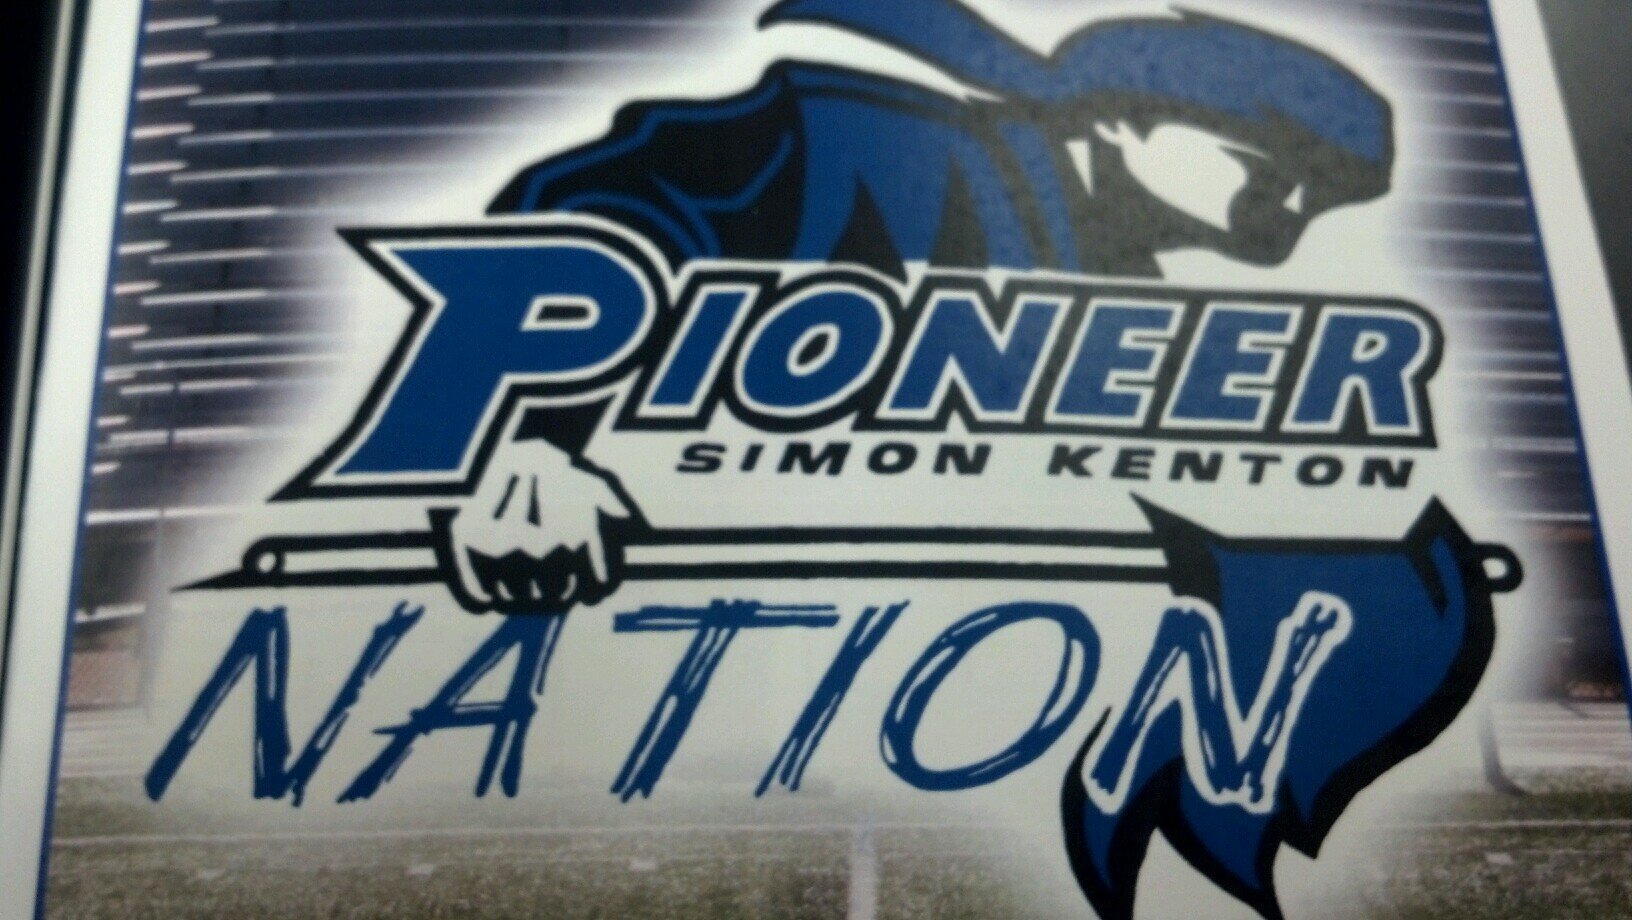 Keep up with all the latest Simon Kenton Information and Announcements.